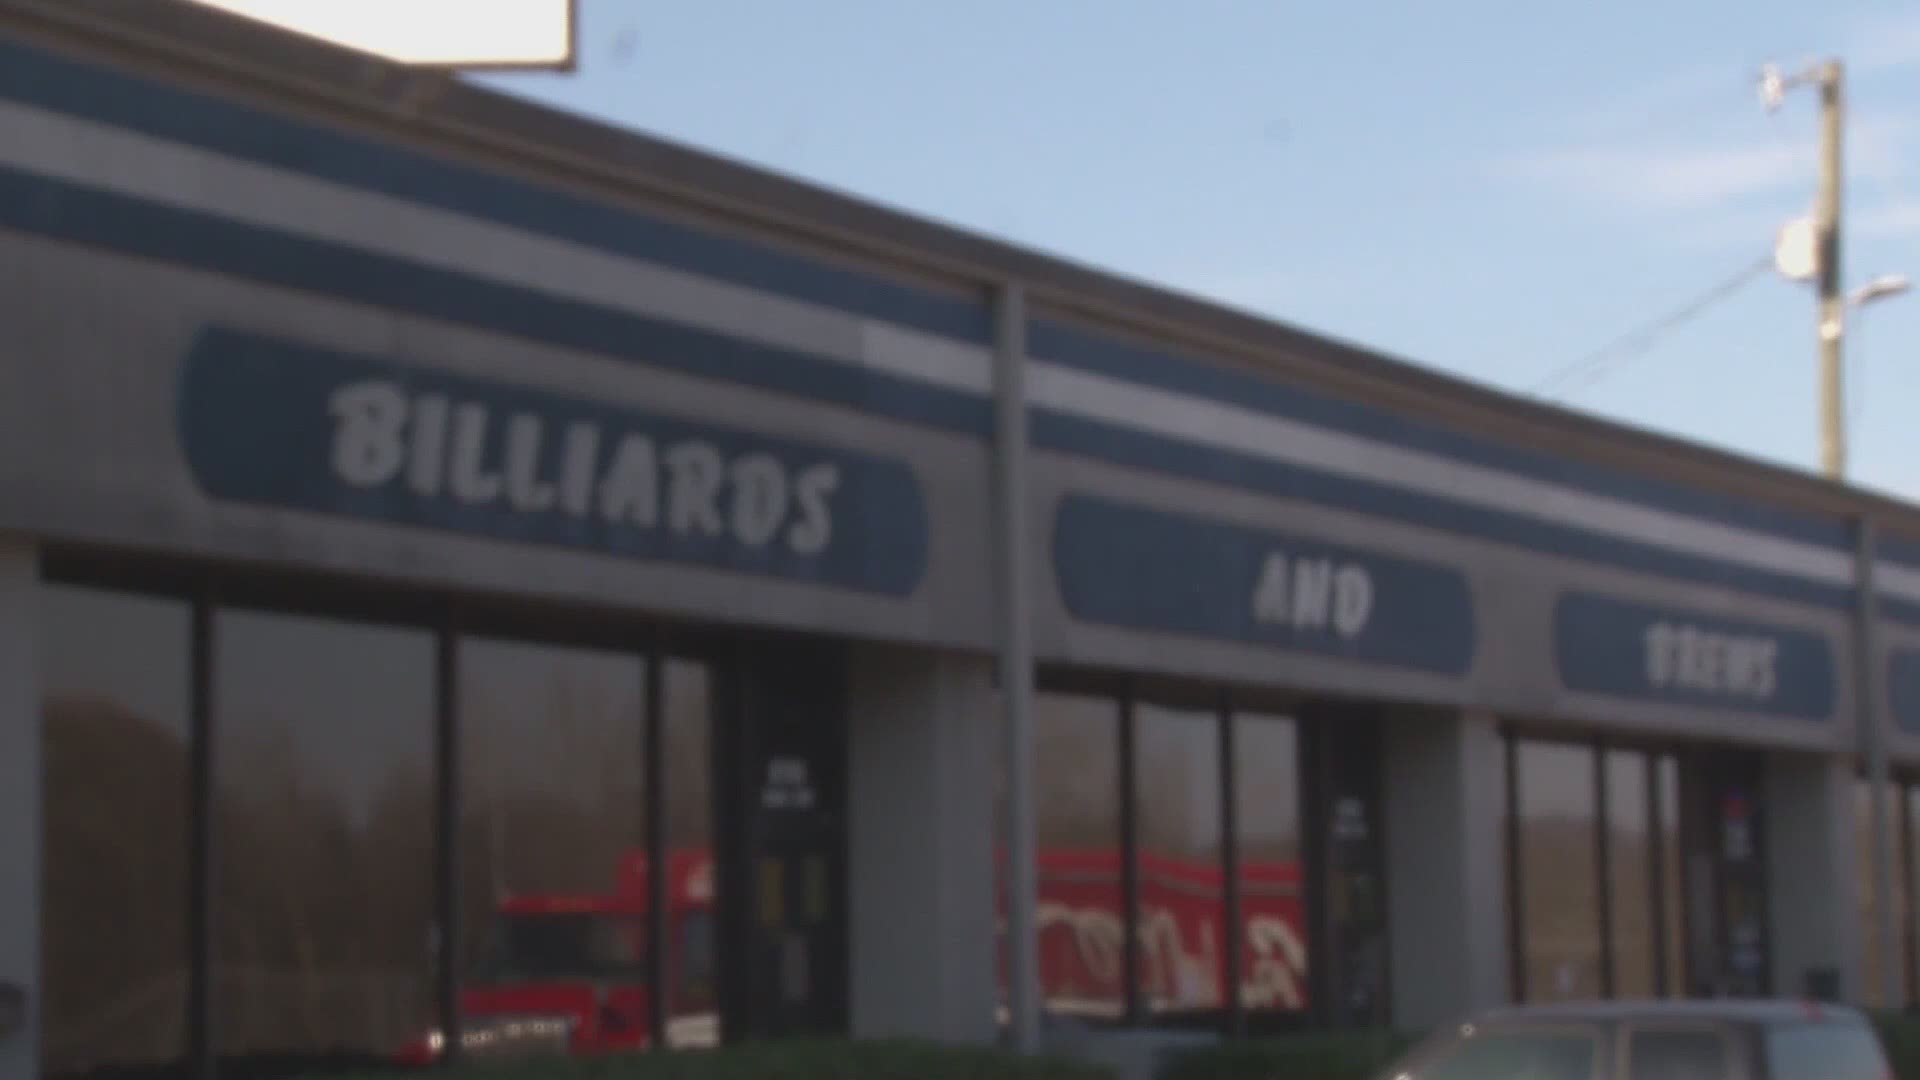 Billiards & Brews was cited 18 times for failing to follow a 10 p.m. closure order imposed by the health board.